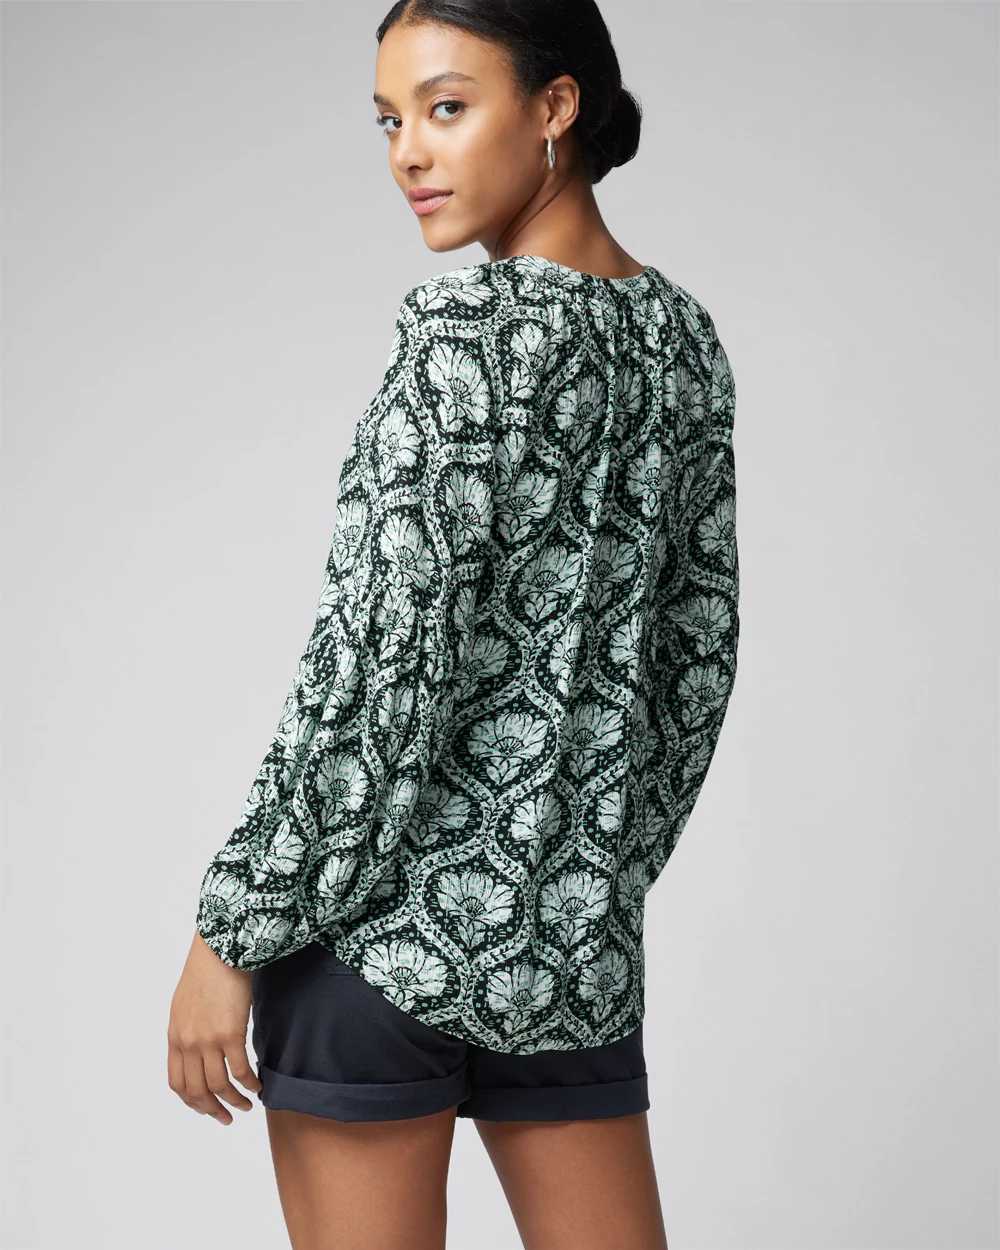 Long Sleeve High-Low Printed Blouse click to view larger image.